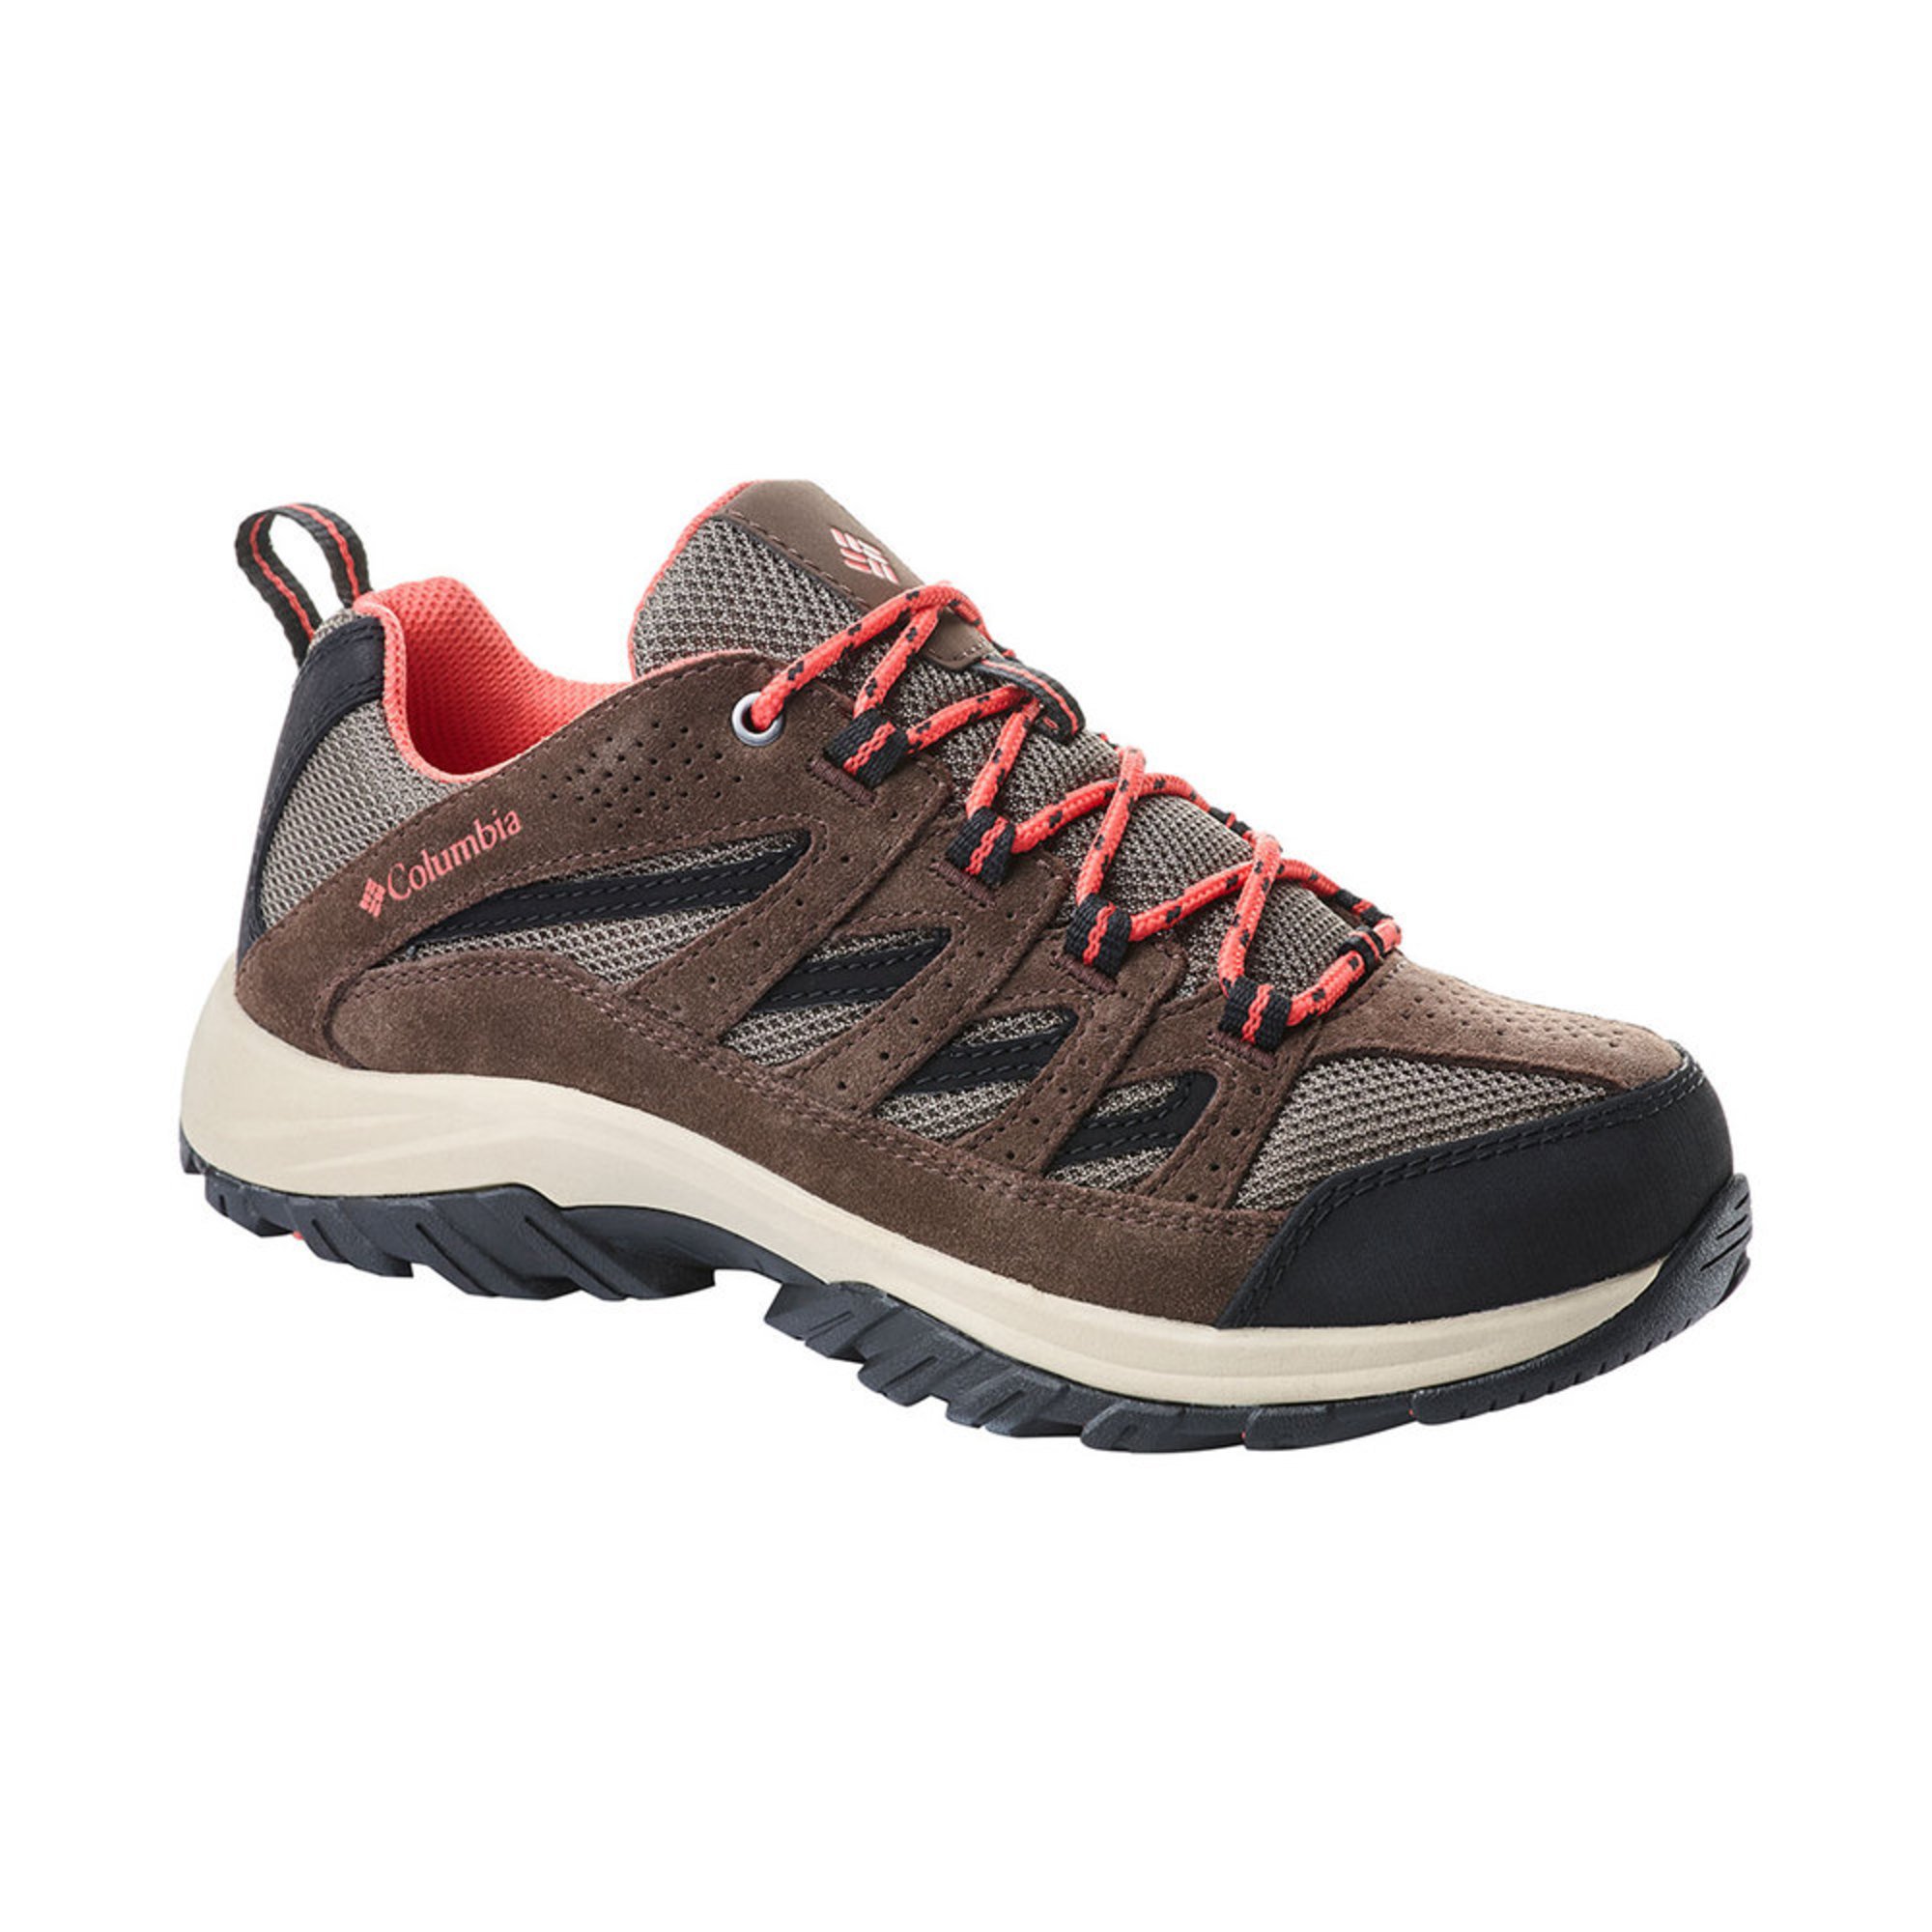 Columbia Women's Crestwood Sneaker | Women's Hiking And Outdoor Shoes ...